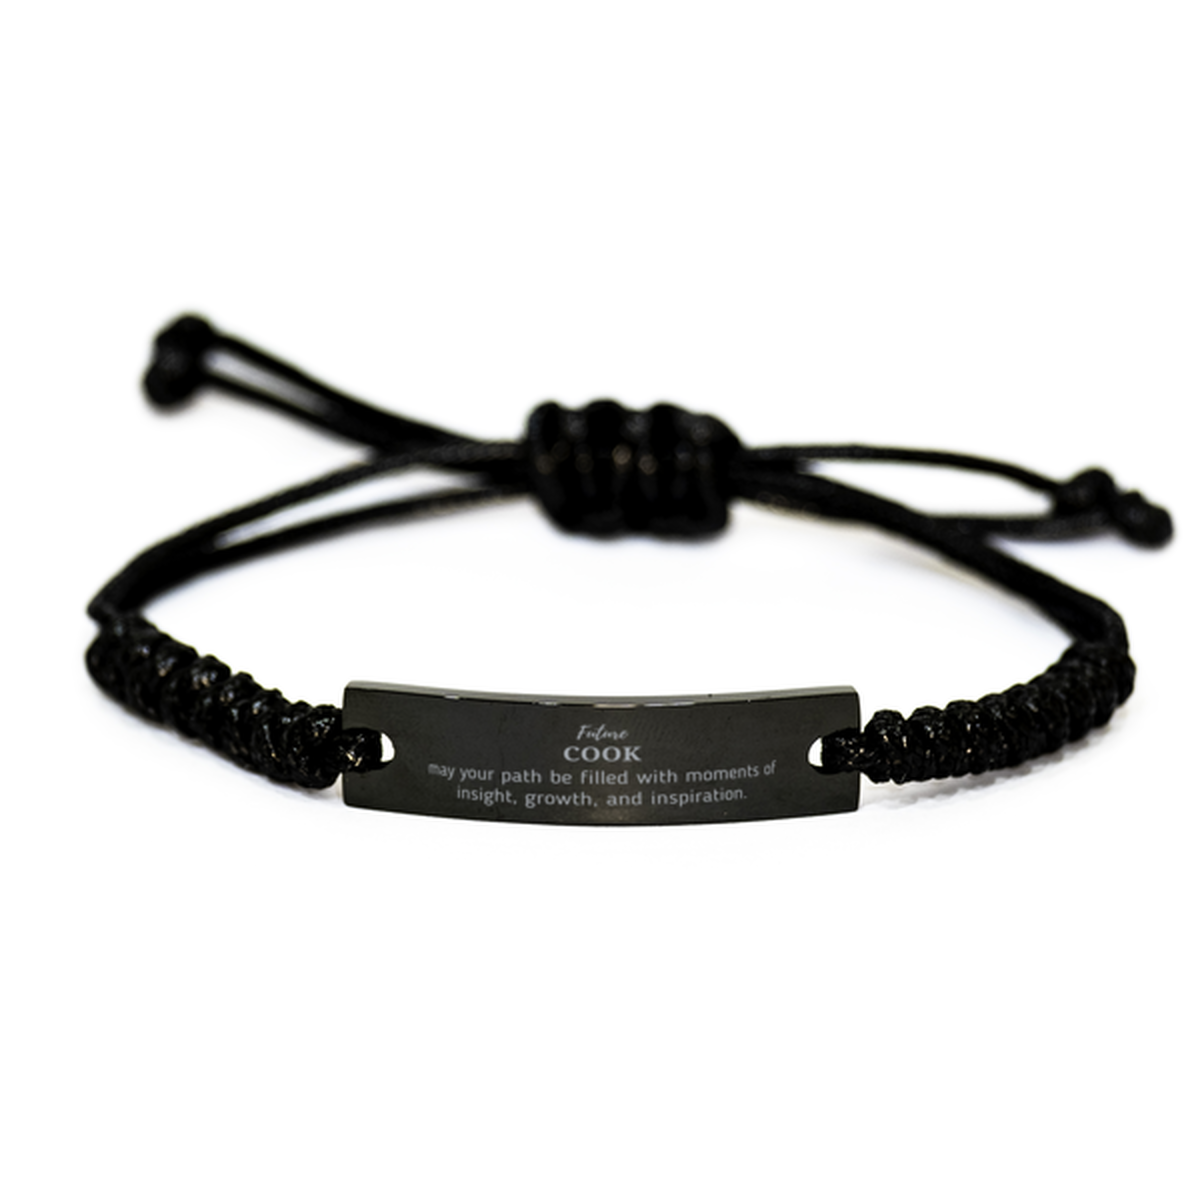 Future Cook Gifts, May your path be filled with moments of insight, Graduation Gifts for New Cook, Christmas Unique Black Rope Bracelet For Men, Women, Friends